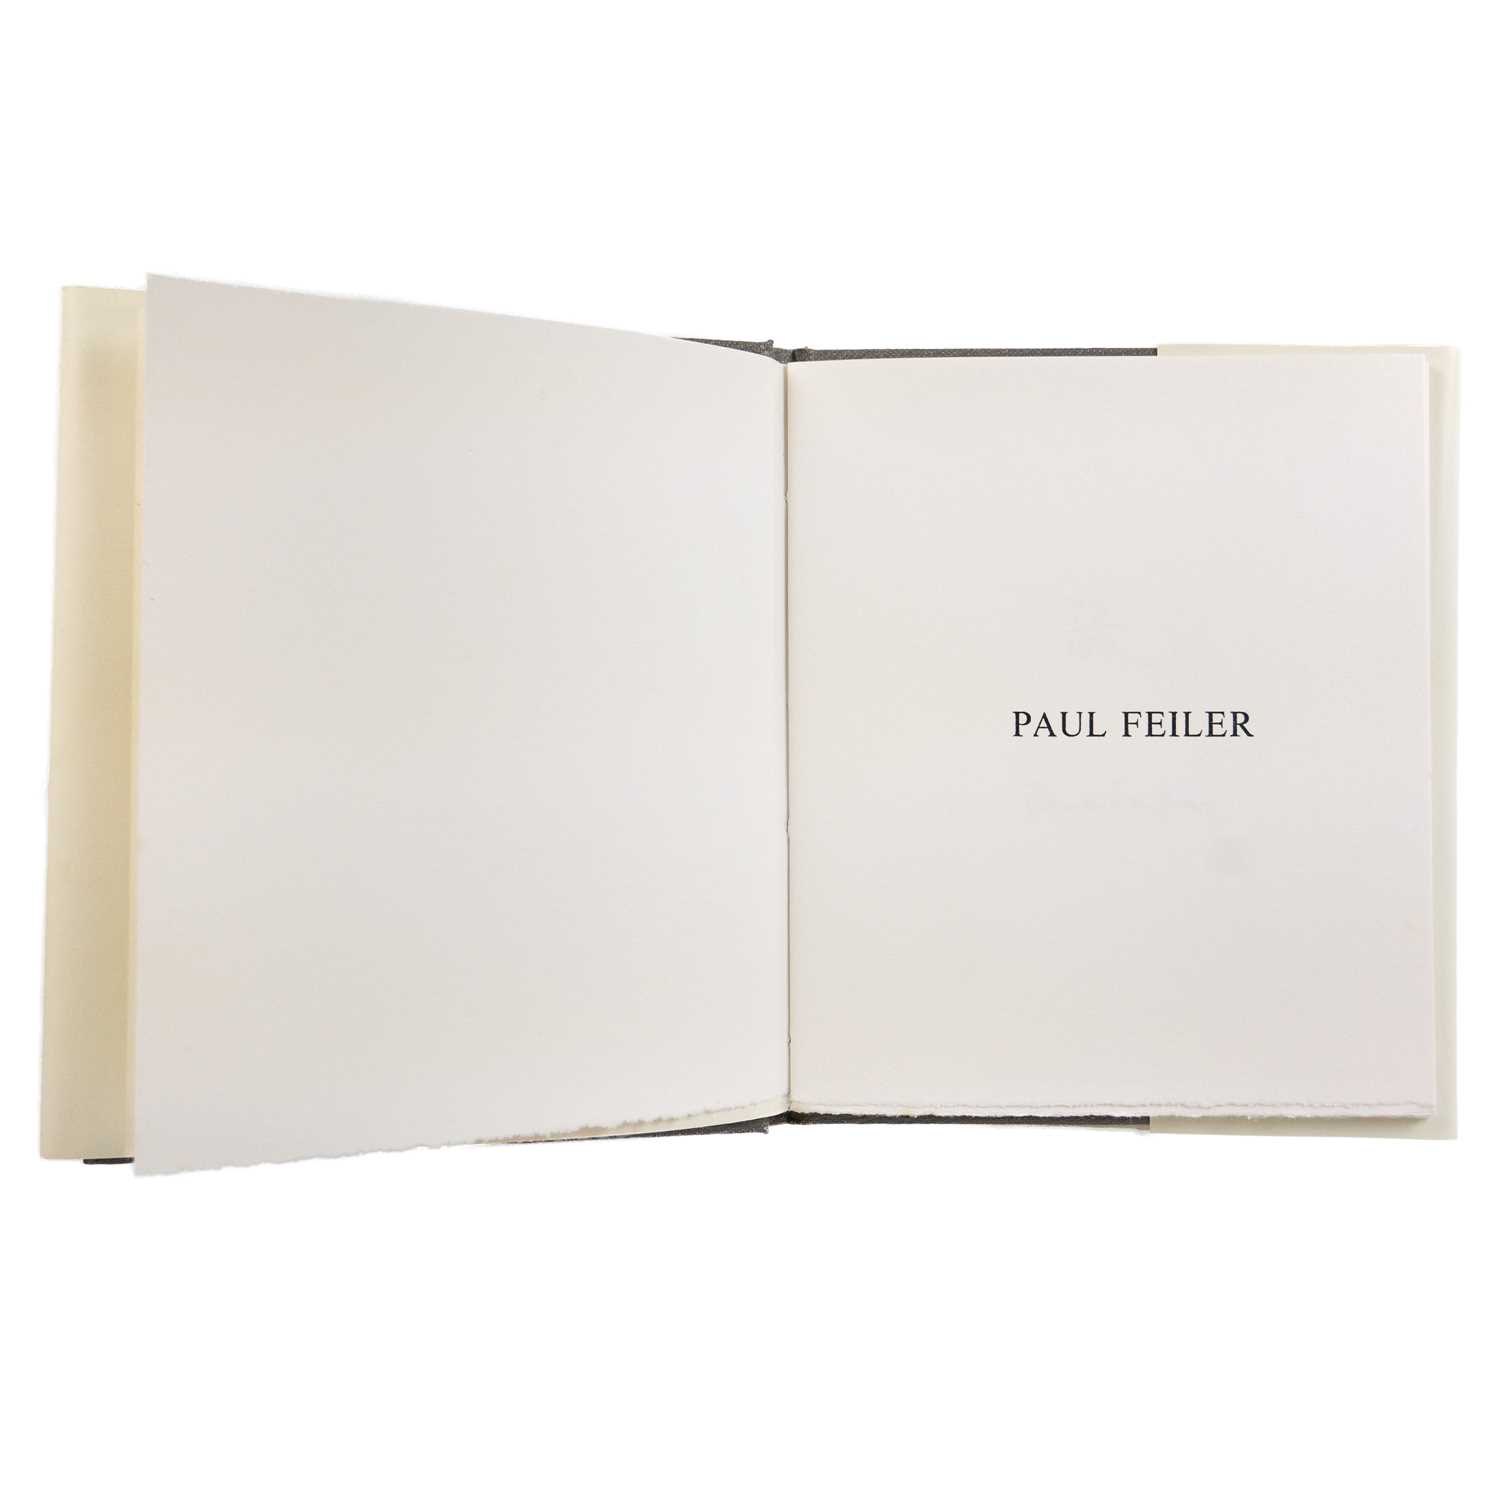 'Paul Feiler' published by Andrew Lanyon (1990) signed and numbered 73/150 by Paul Feiler, - Image 4 of 8